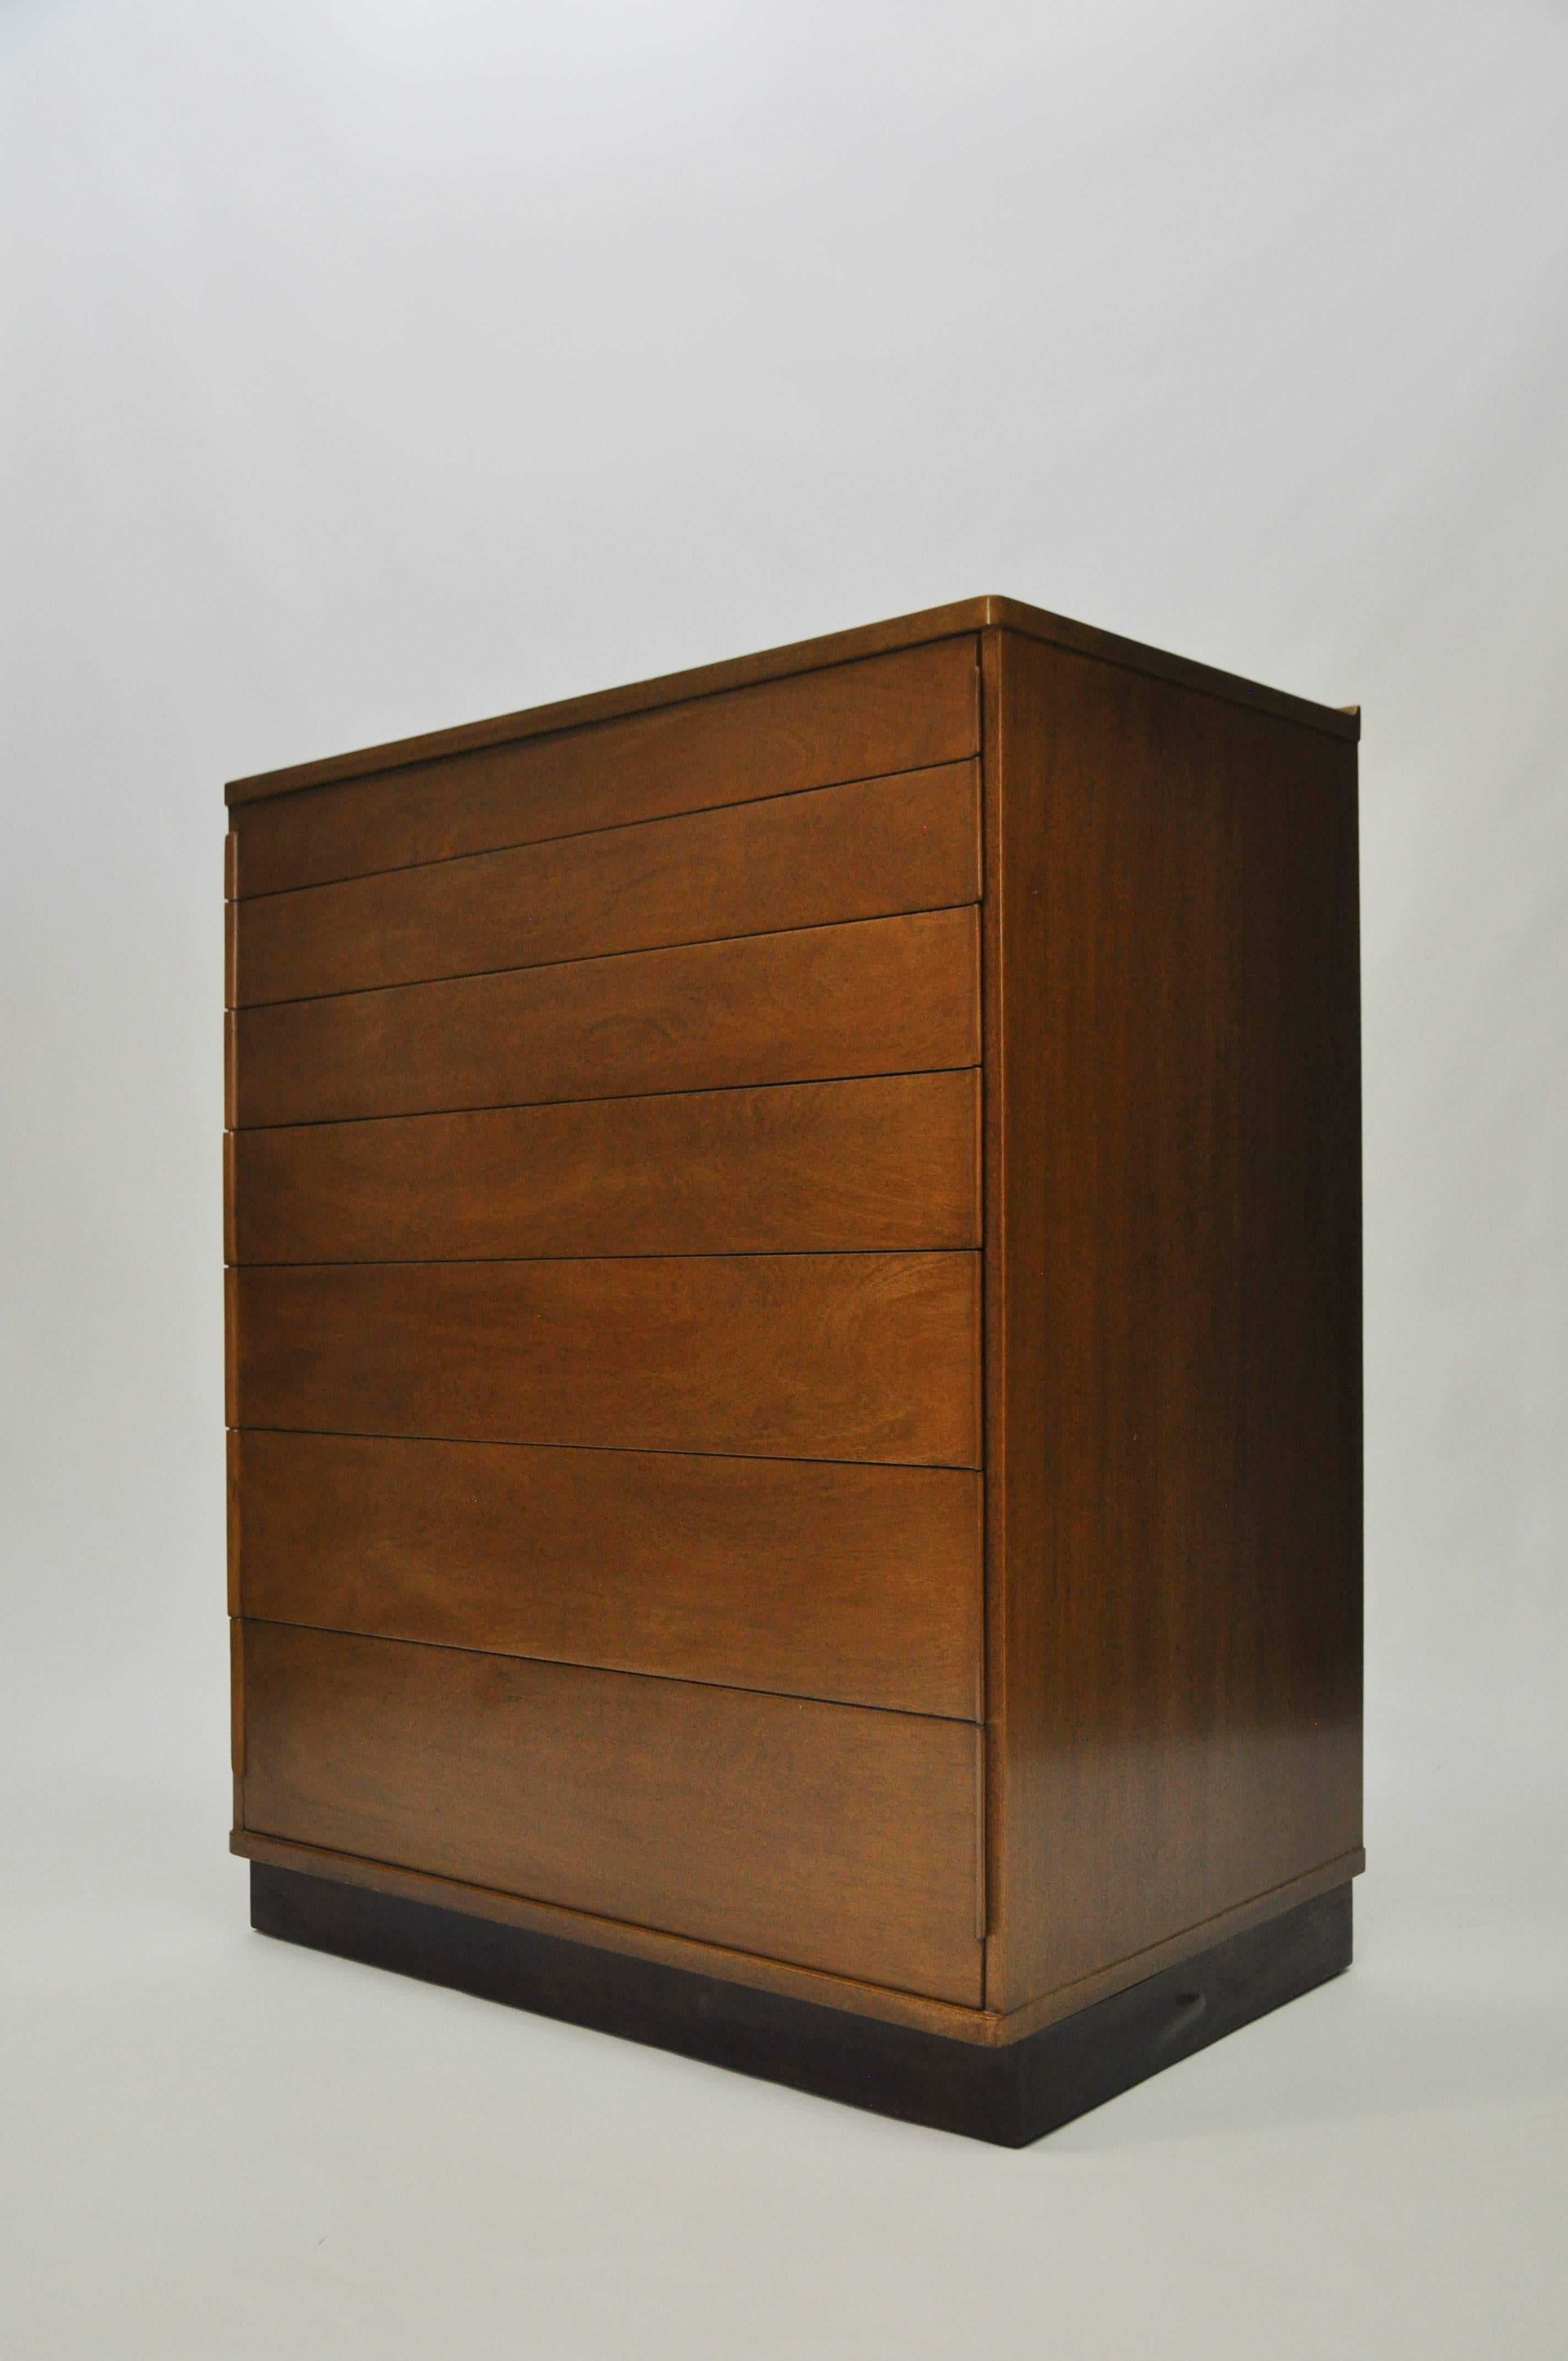 Late 1950s Dunbar seven-drawer chest by Ed Wormley. Warm medium brown walnut finish. Solid oak secondary wood is used for the drawers, which are dovetailed on all four corners. Leather wrapped base. The back of the top has a flared edge, which